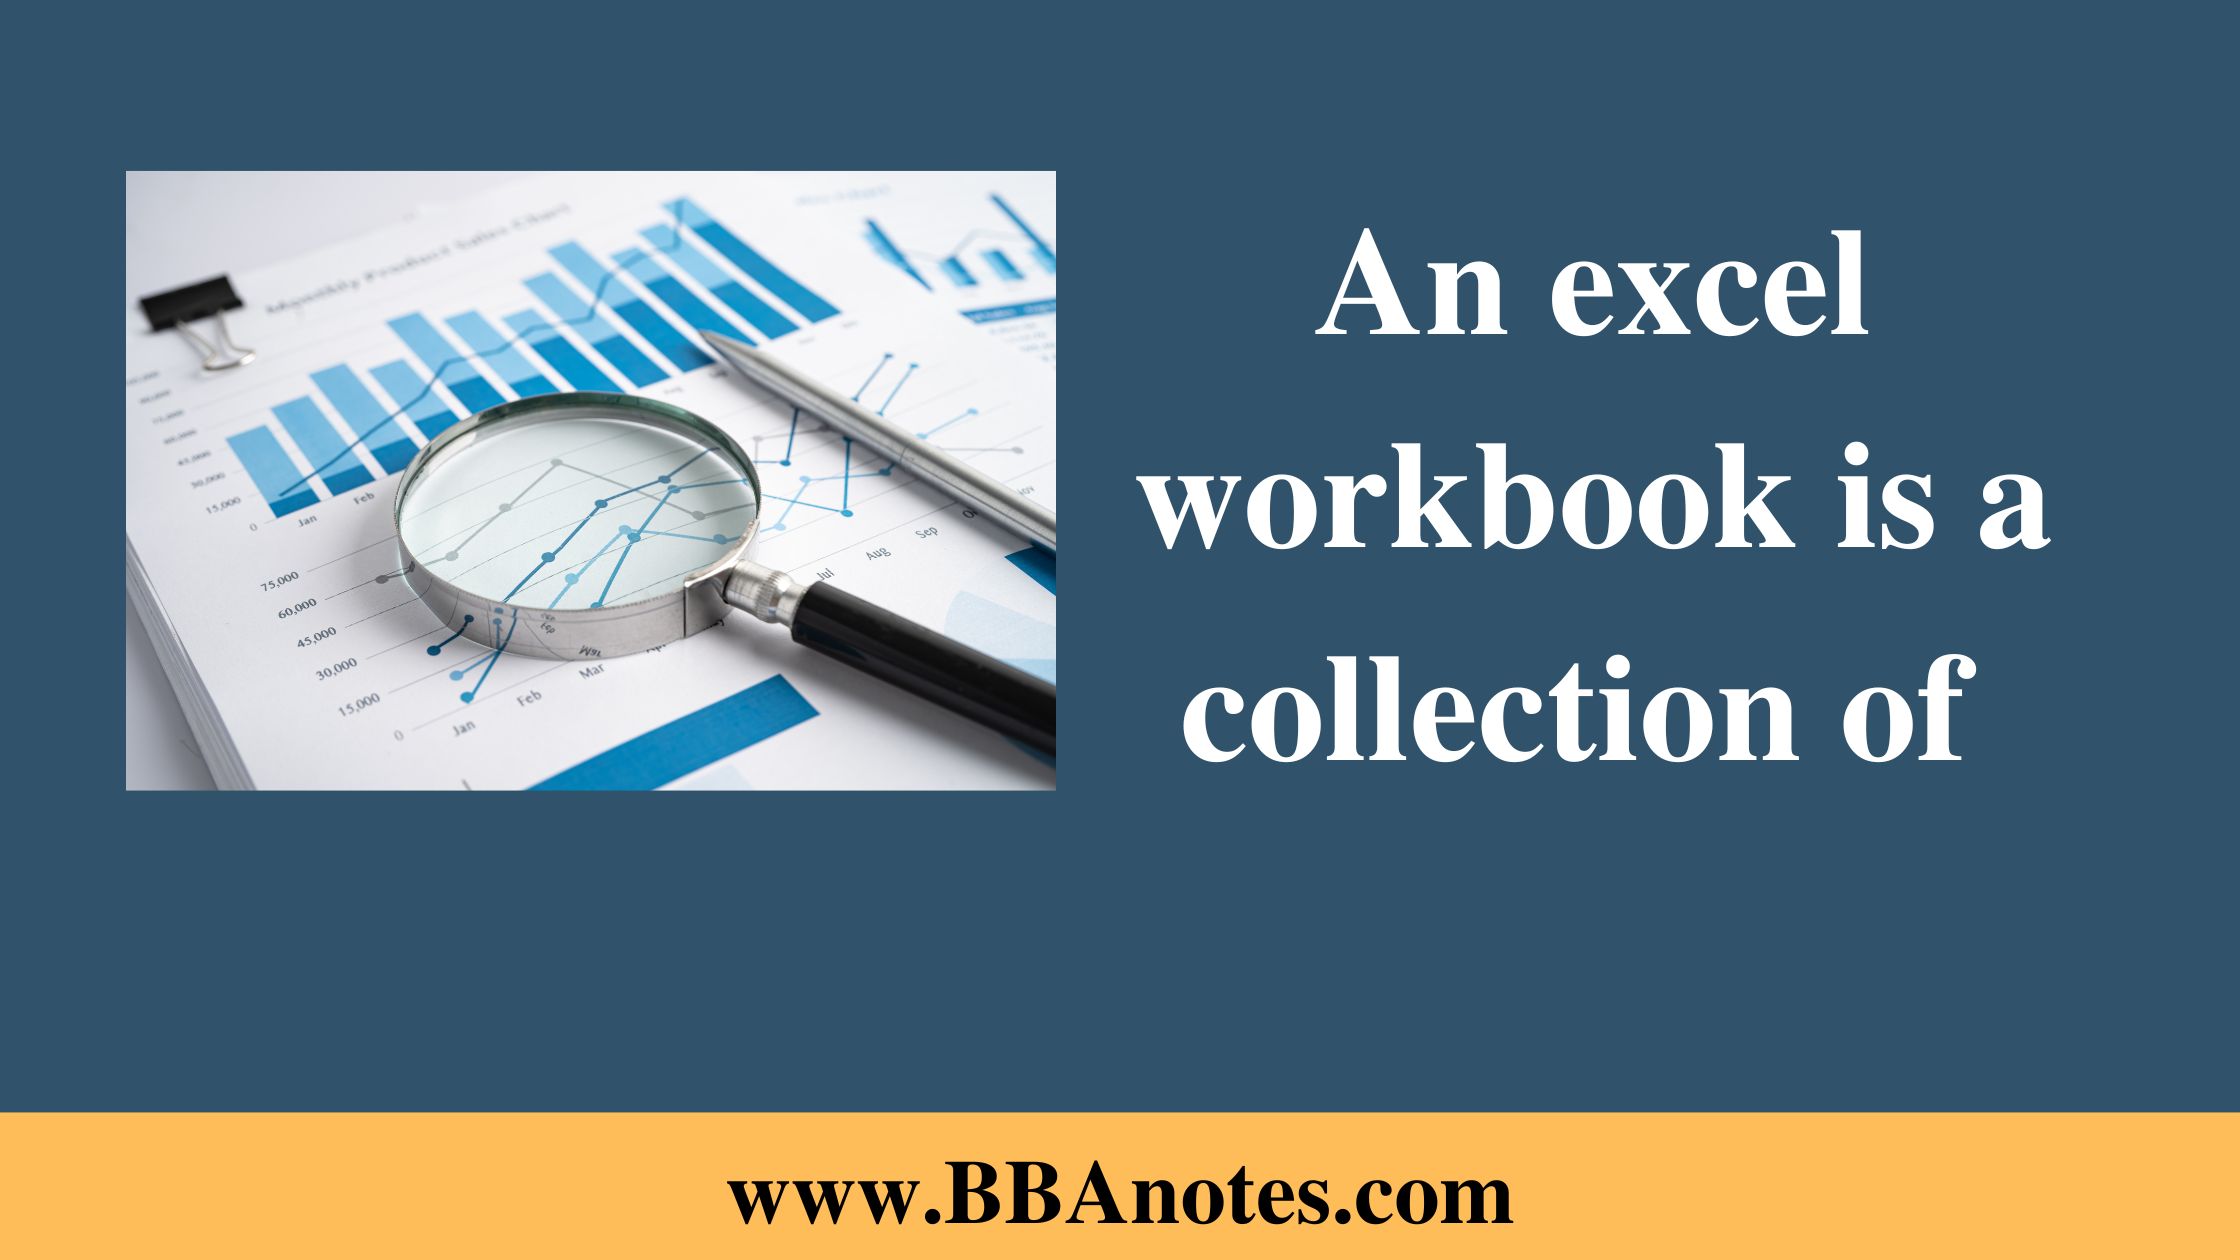 An excel workbook is a collection of Charts and Worksheets.